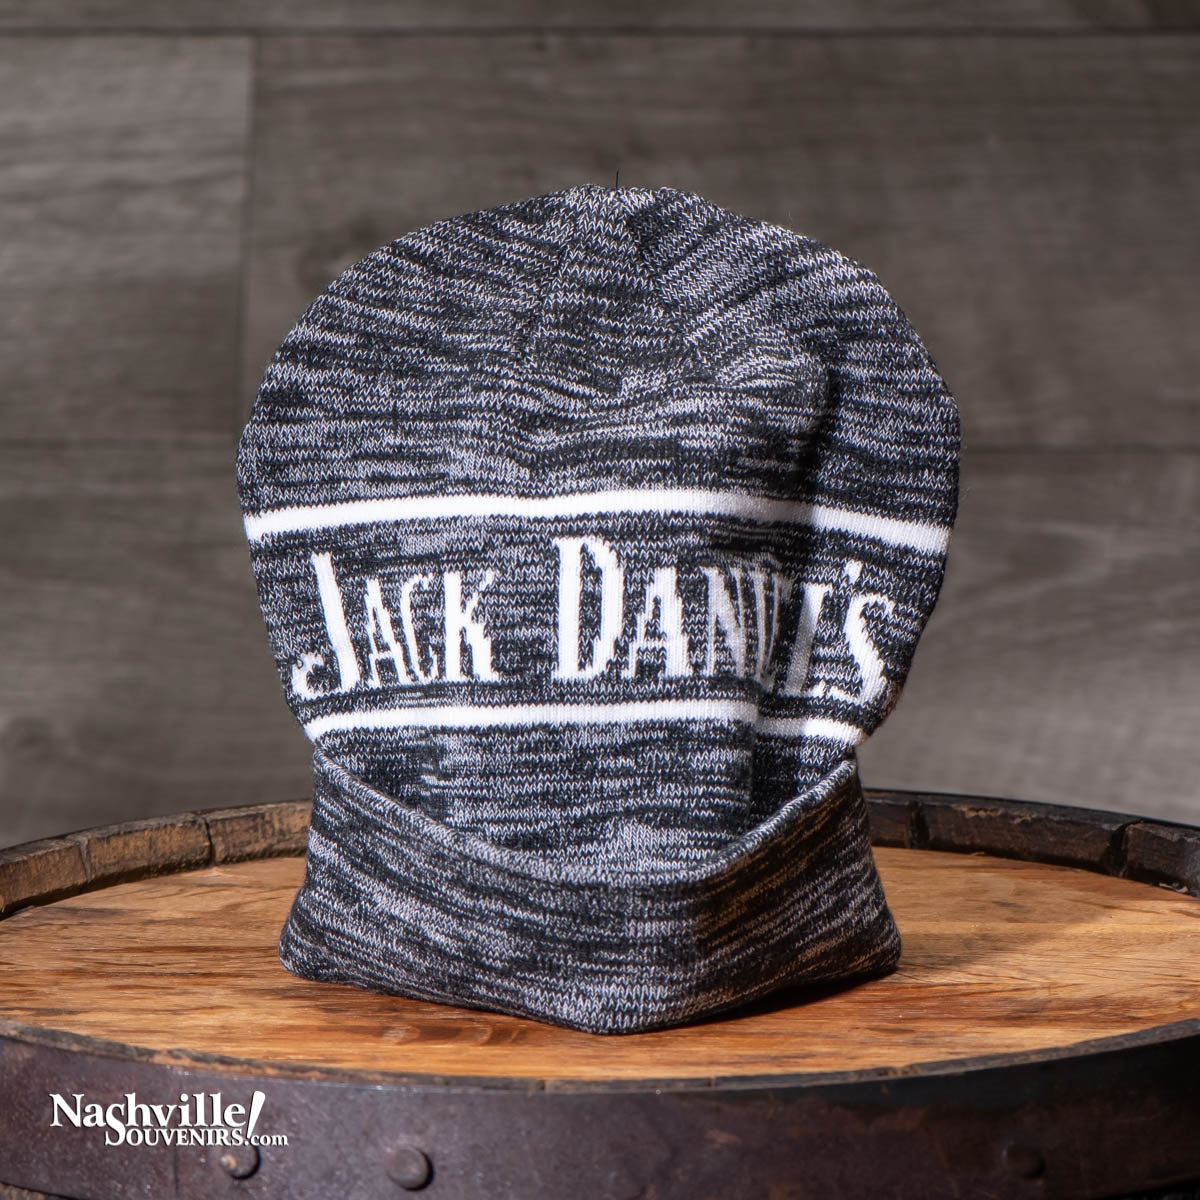 Who said Jack doesn't know millennial fashion? Prove it wearing this Jack Daniel's Beanie Hat. Keep those ears nice and warm in this acrylic JD beanie cap.